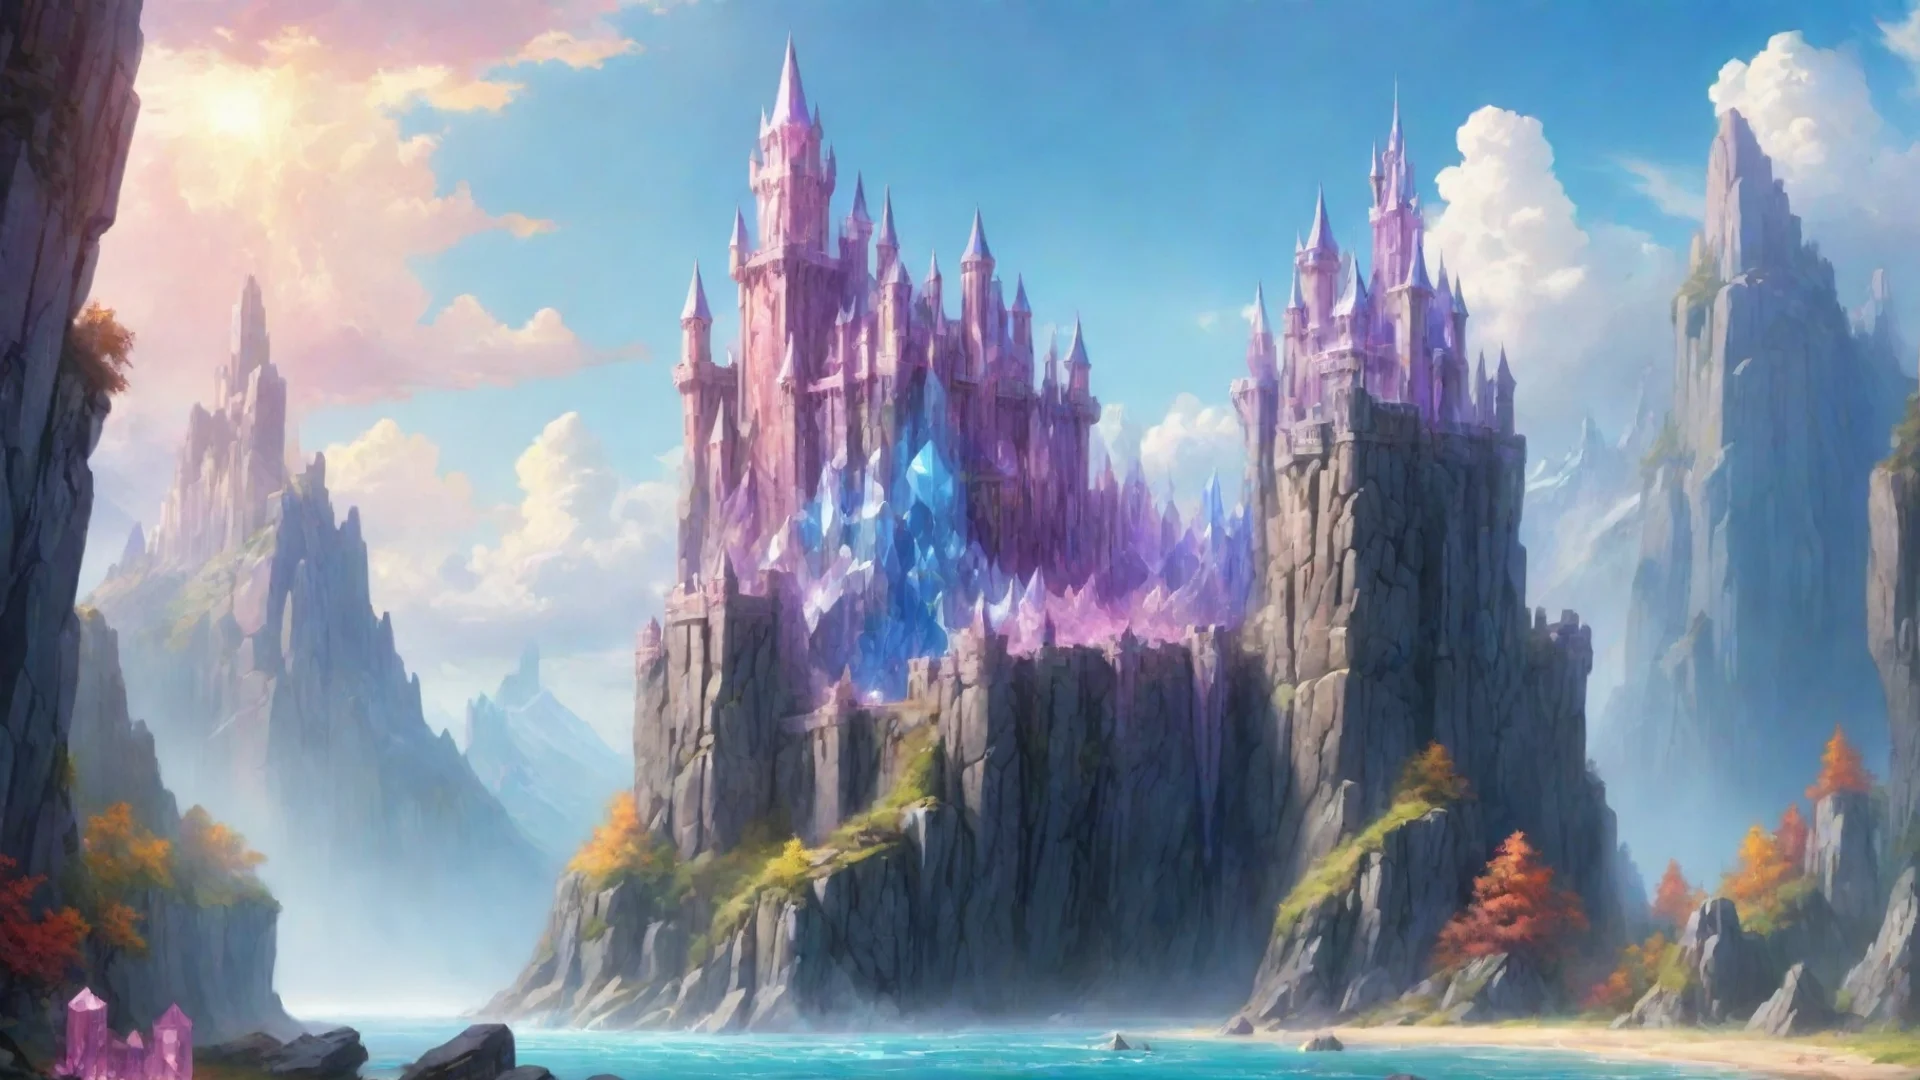 aiartstation art castle fantasy landscape with giant crystal build on giant crystal cliffs bright colors confident engaging wow 3 wide